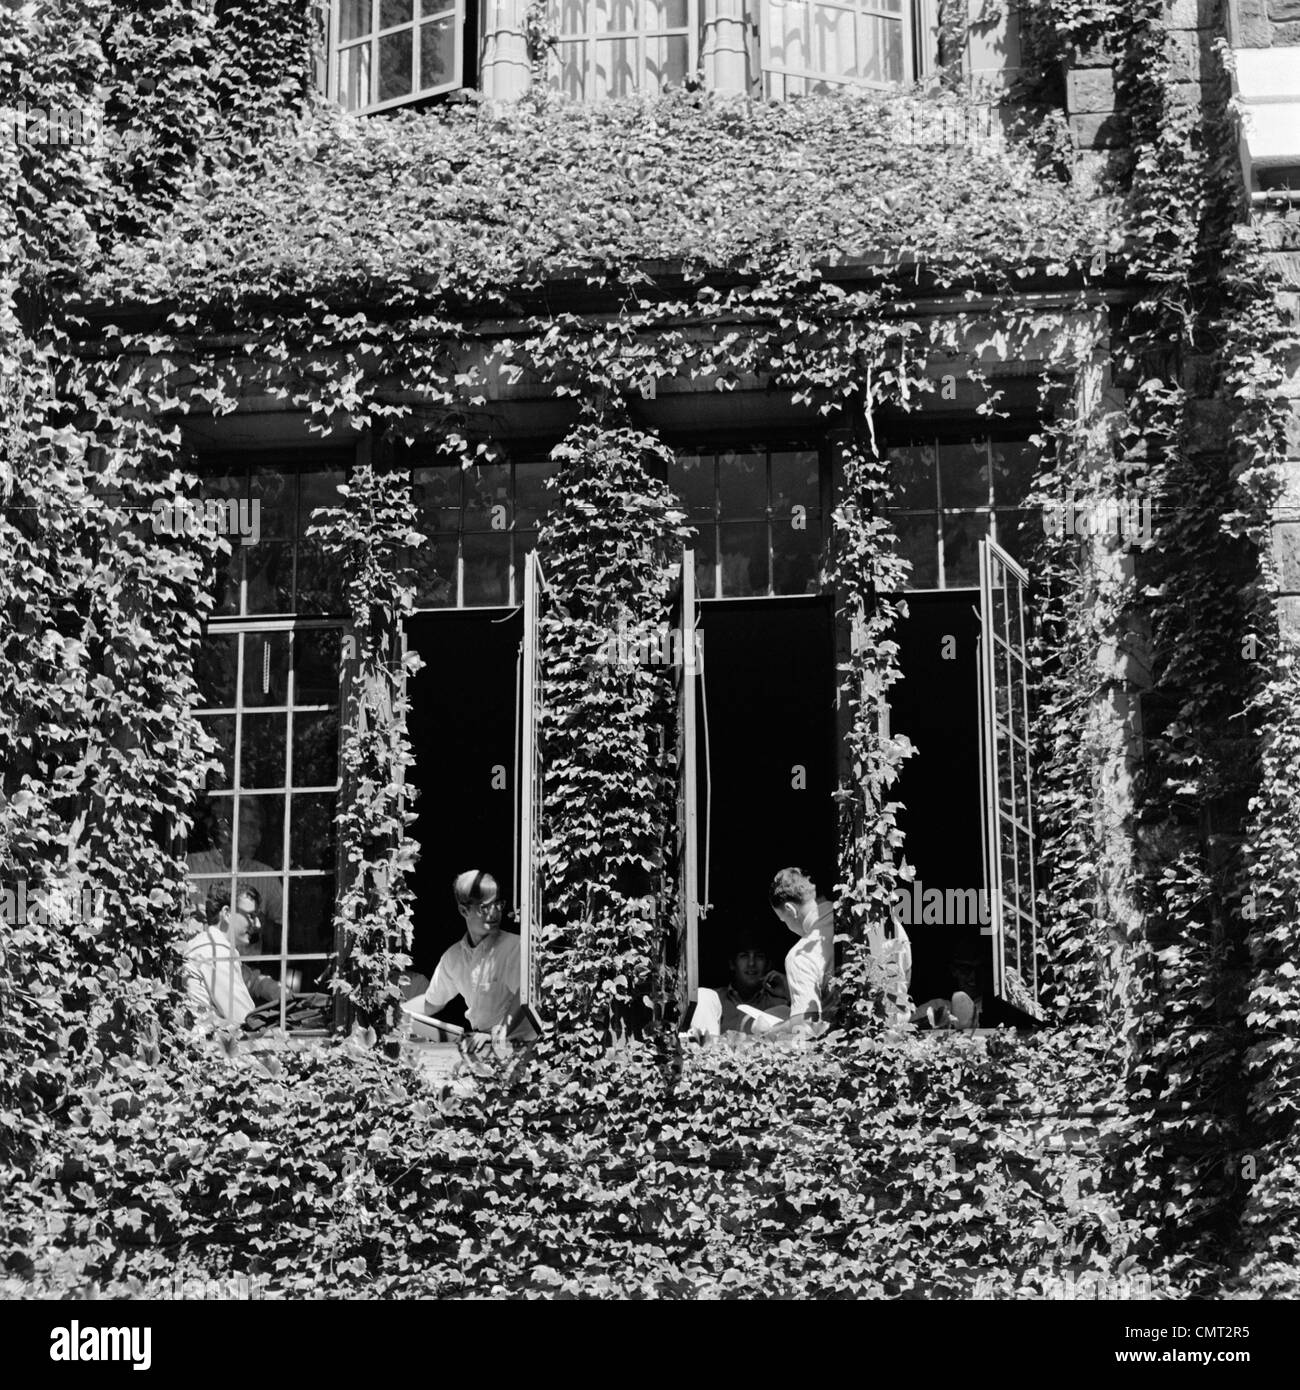 1960s MALE COLLEGE STUDENTS SITTING & STUDYING AT WINDOWS OF IVY-COVERED CAMPUS BUILDING Stock Photo